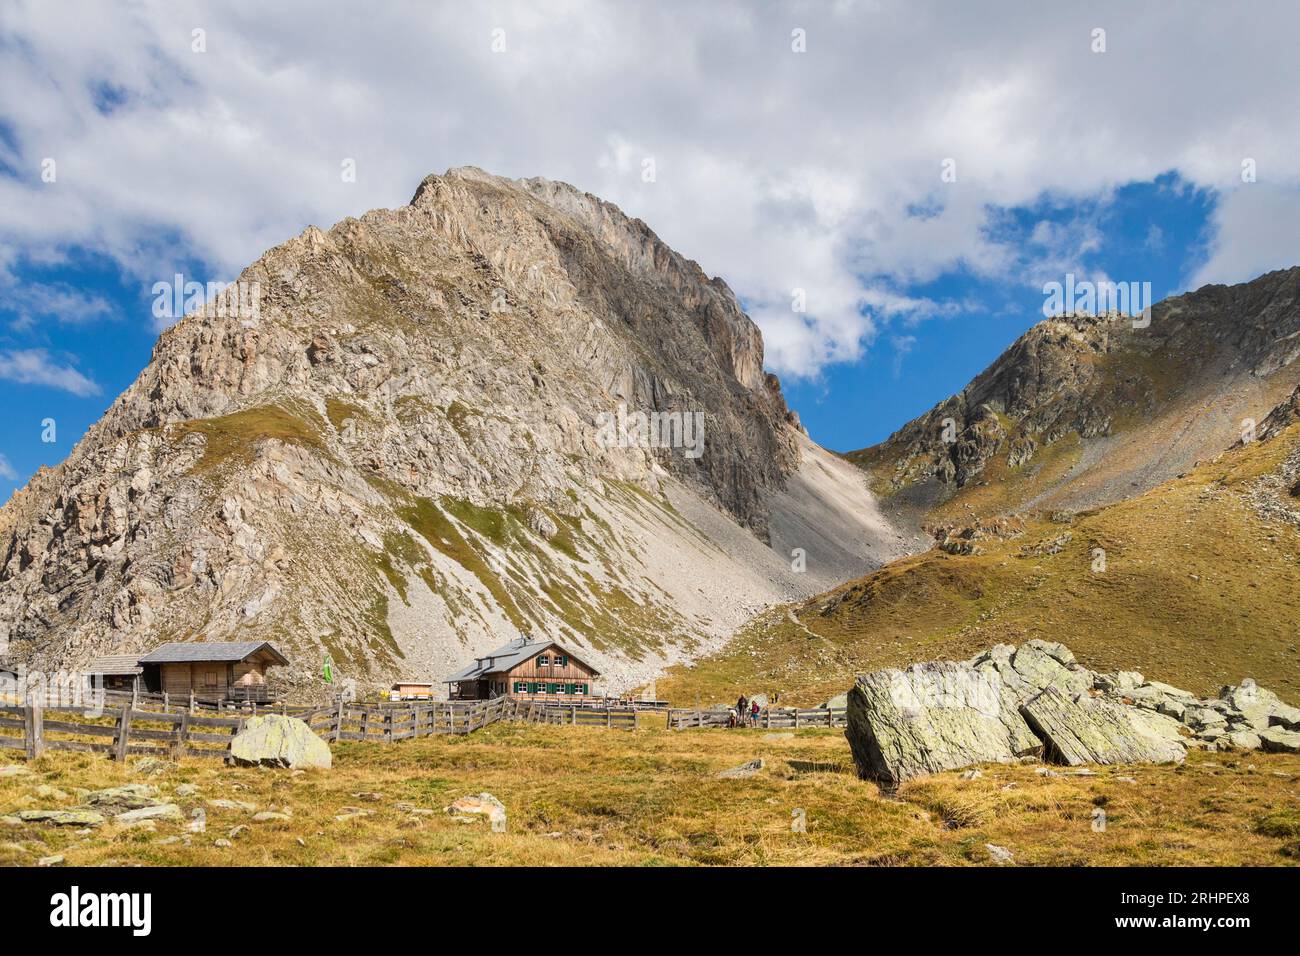 Austria, East Tyrol, district of Lienz, Kartitsch. The alpine hut Obstansersee Hütte in the Carnic Alps Stock Photo